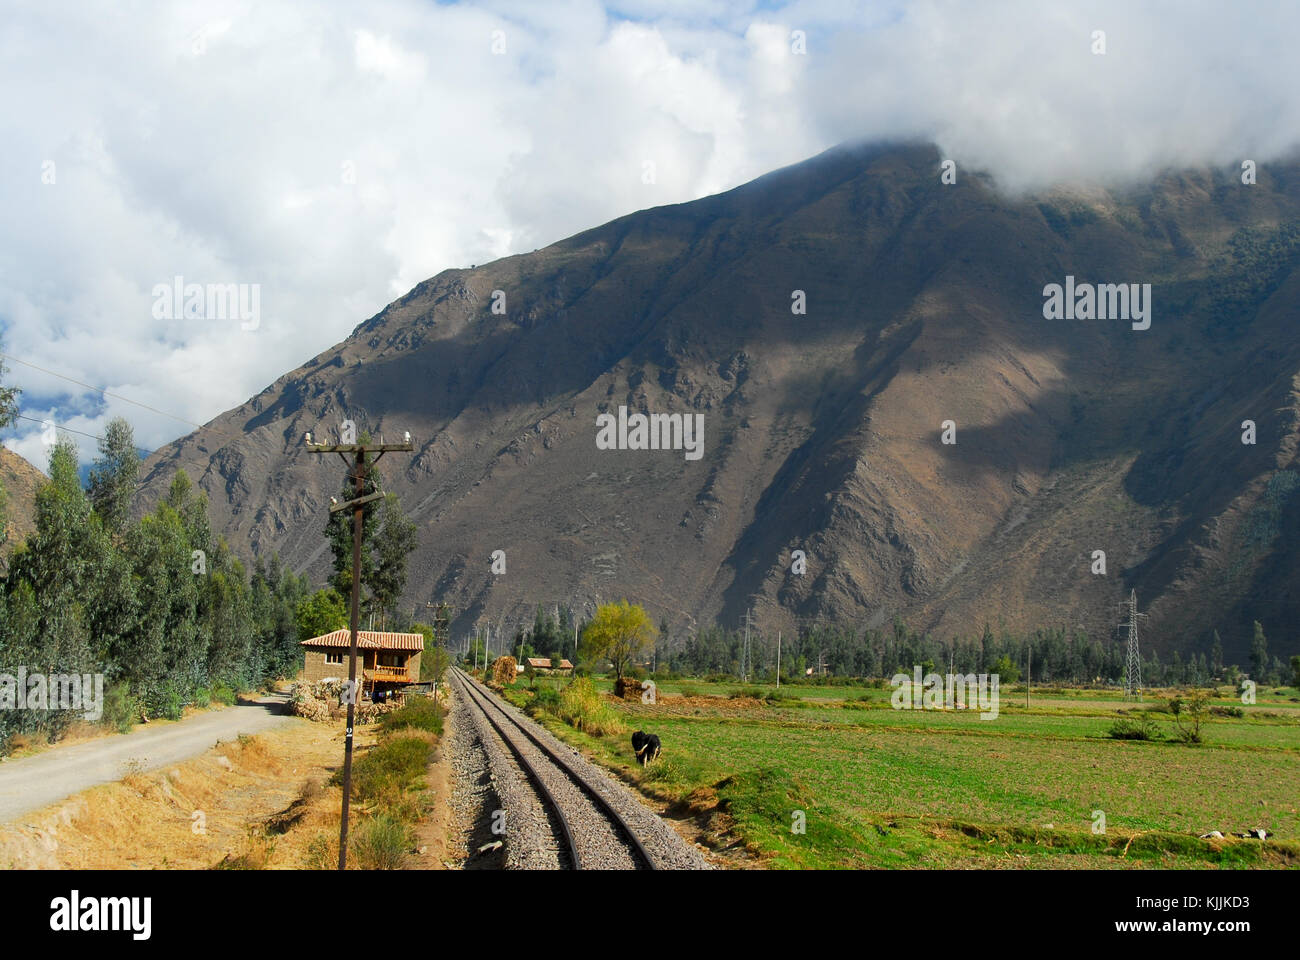 Railroad Tracks through the Andes Mountains in Peru, between Cusco and Machu Picchu Stock Photo